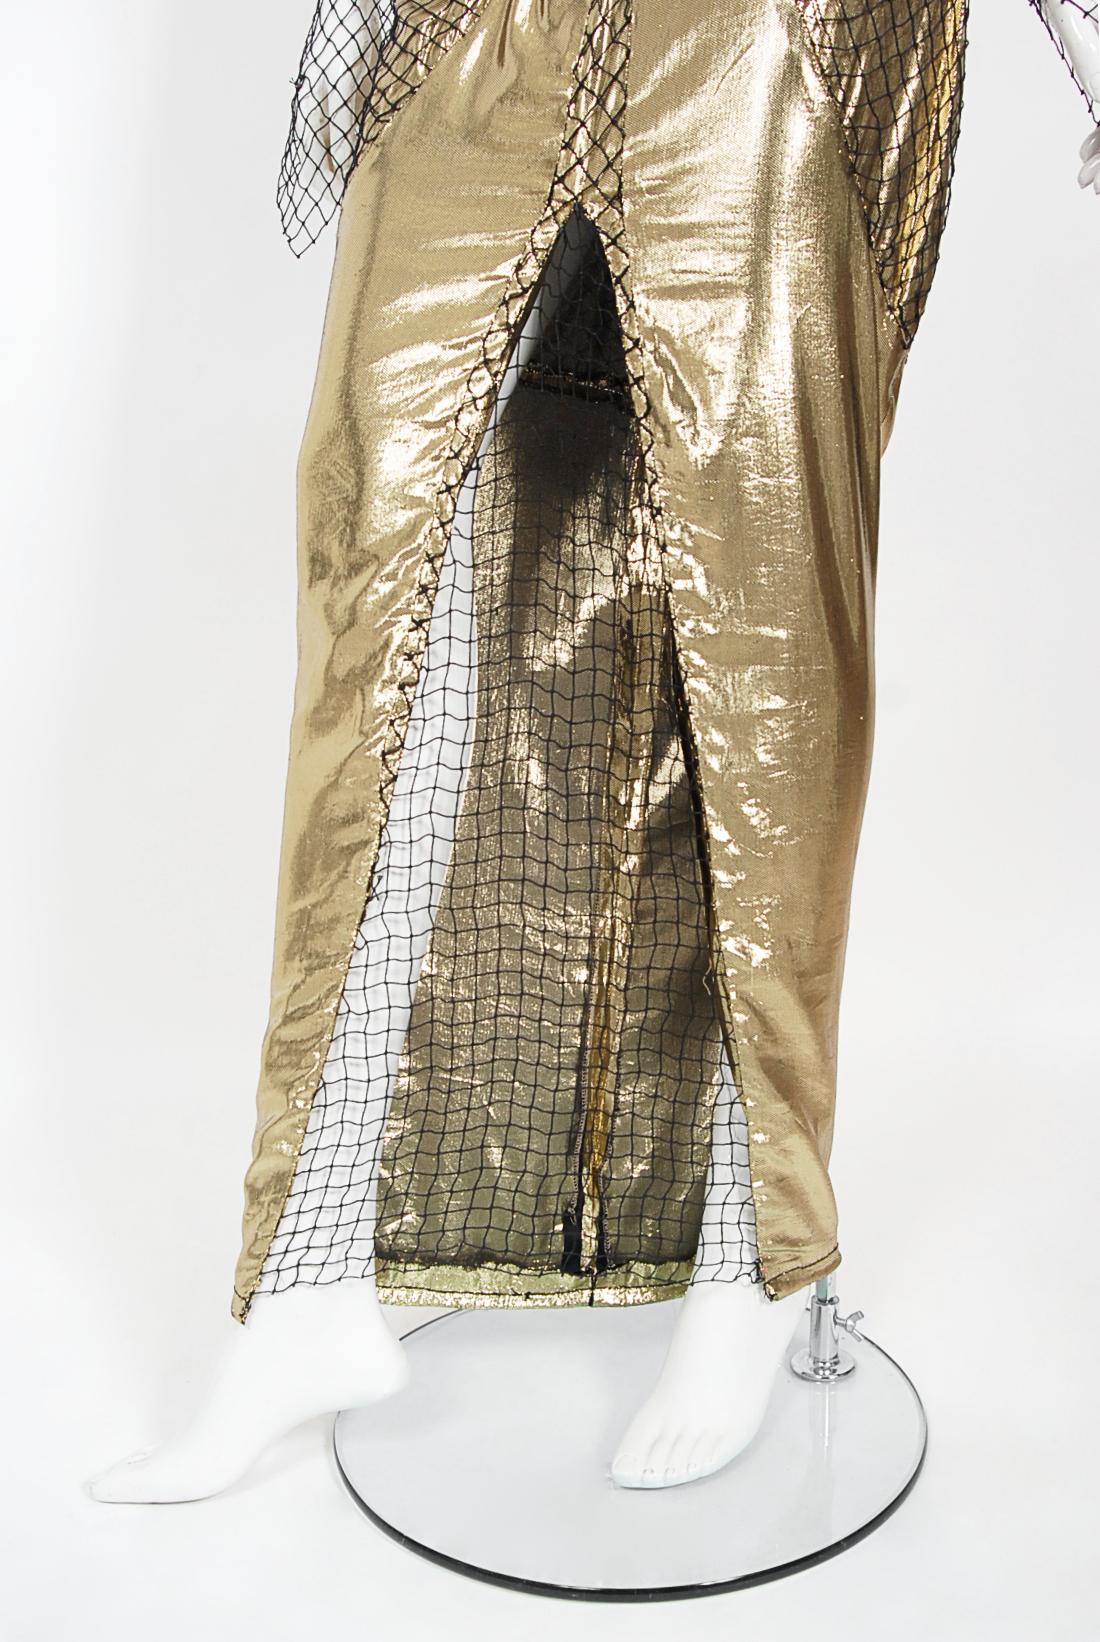 1985 Thierry Mugler Couture Documented Metallic Gold Lamé Fishnet High-Slit Gown For Sale 3